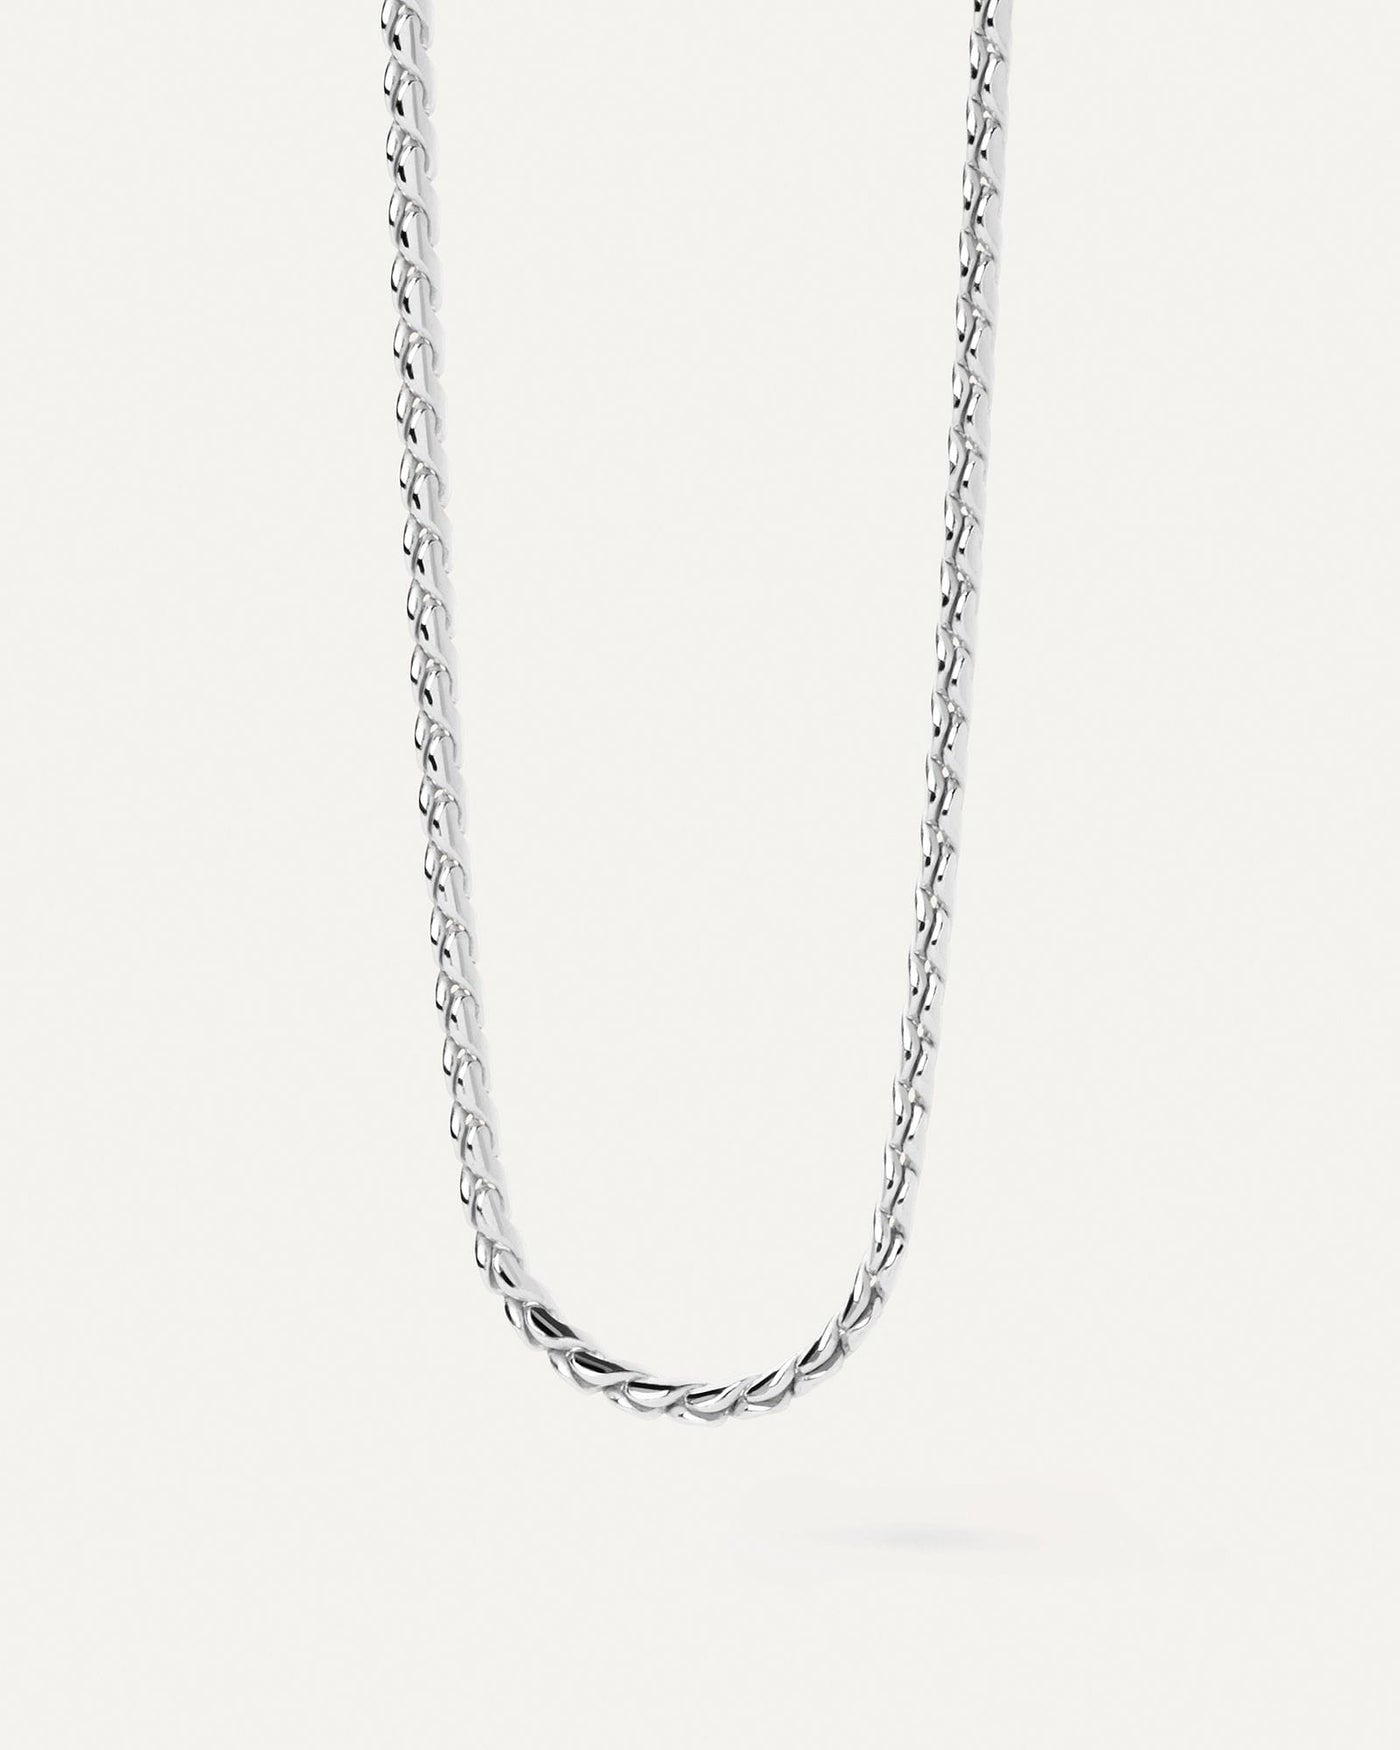 2024 Selection | Large Serpentine Silver Chain Necklace. Modern serpentine silver thick chain necklace with braided links. Get the latest arrival from PDPAOLA. Place your order safely and get this Best Seller. Free Shipping.